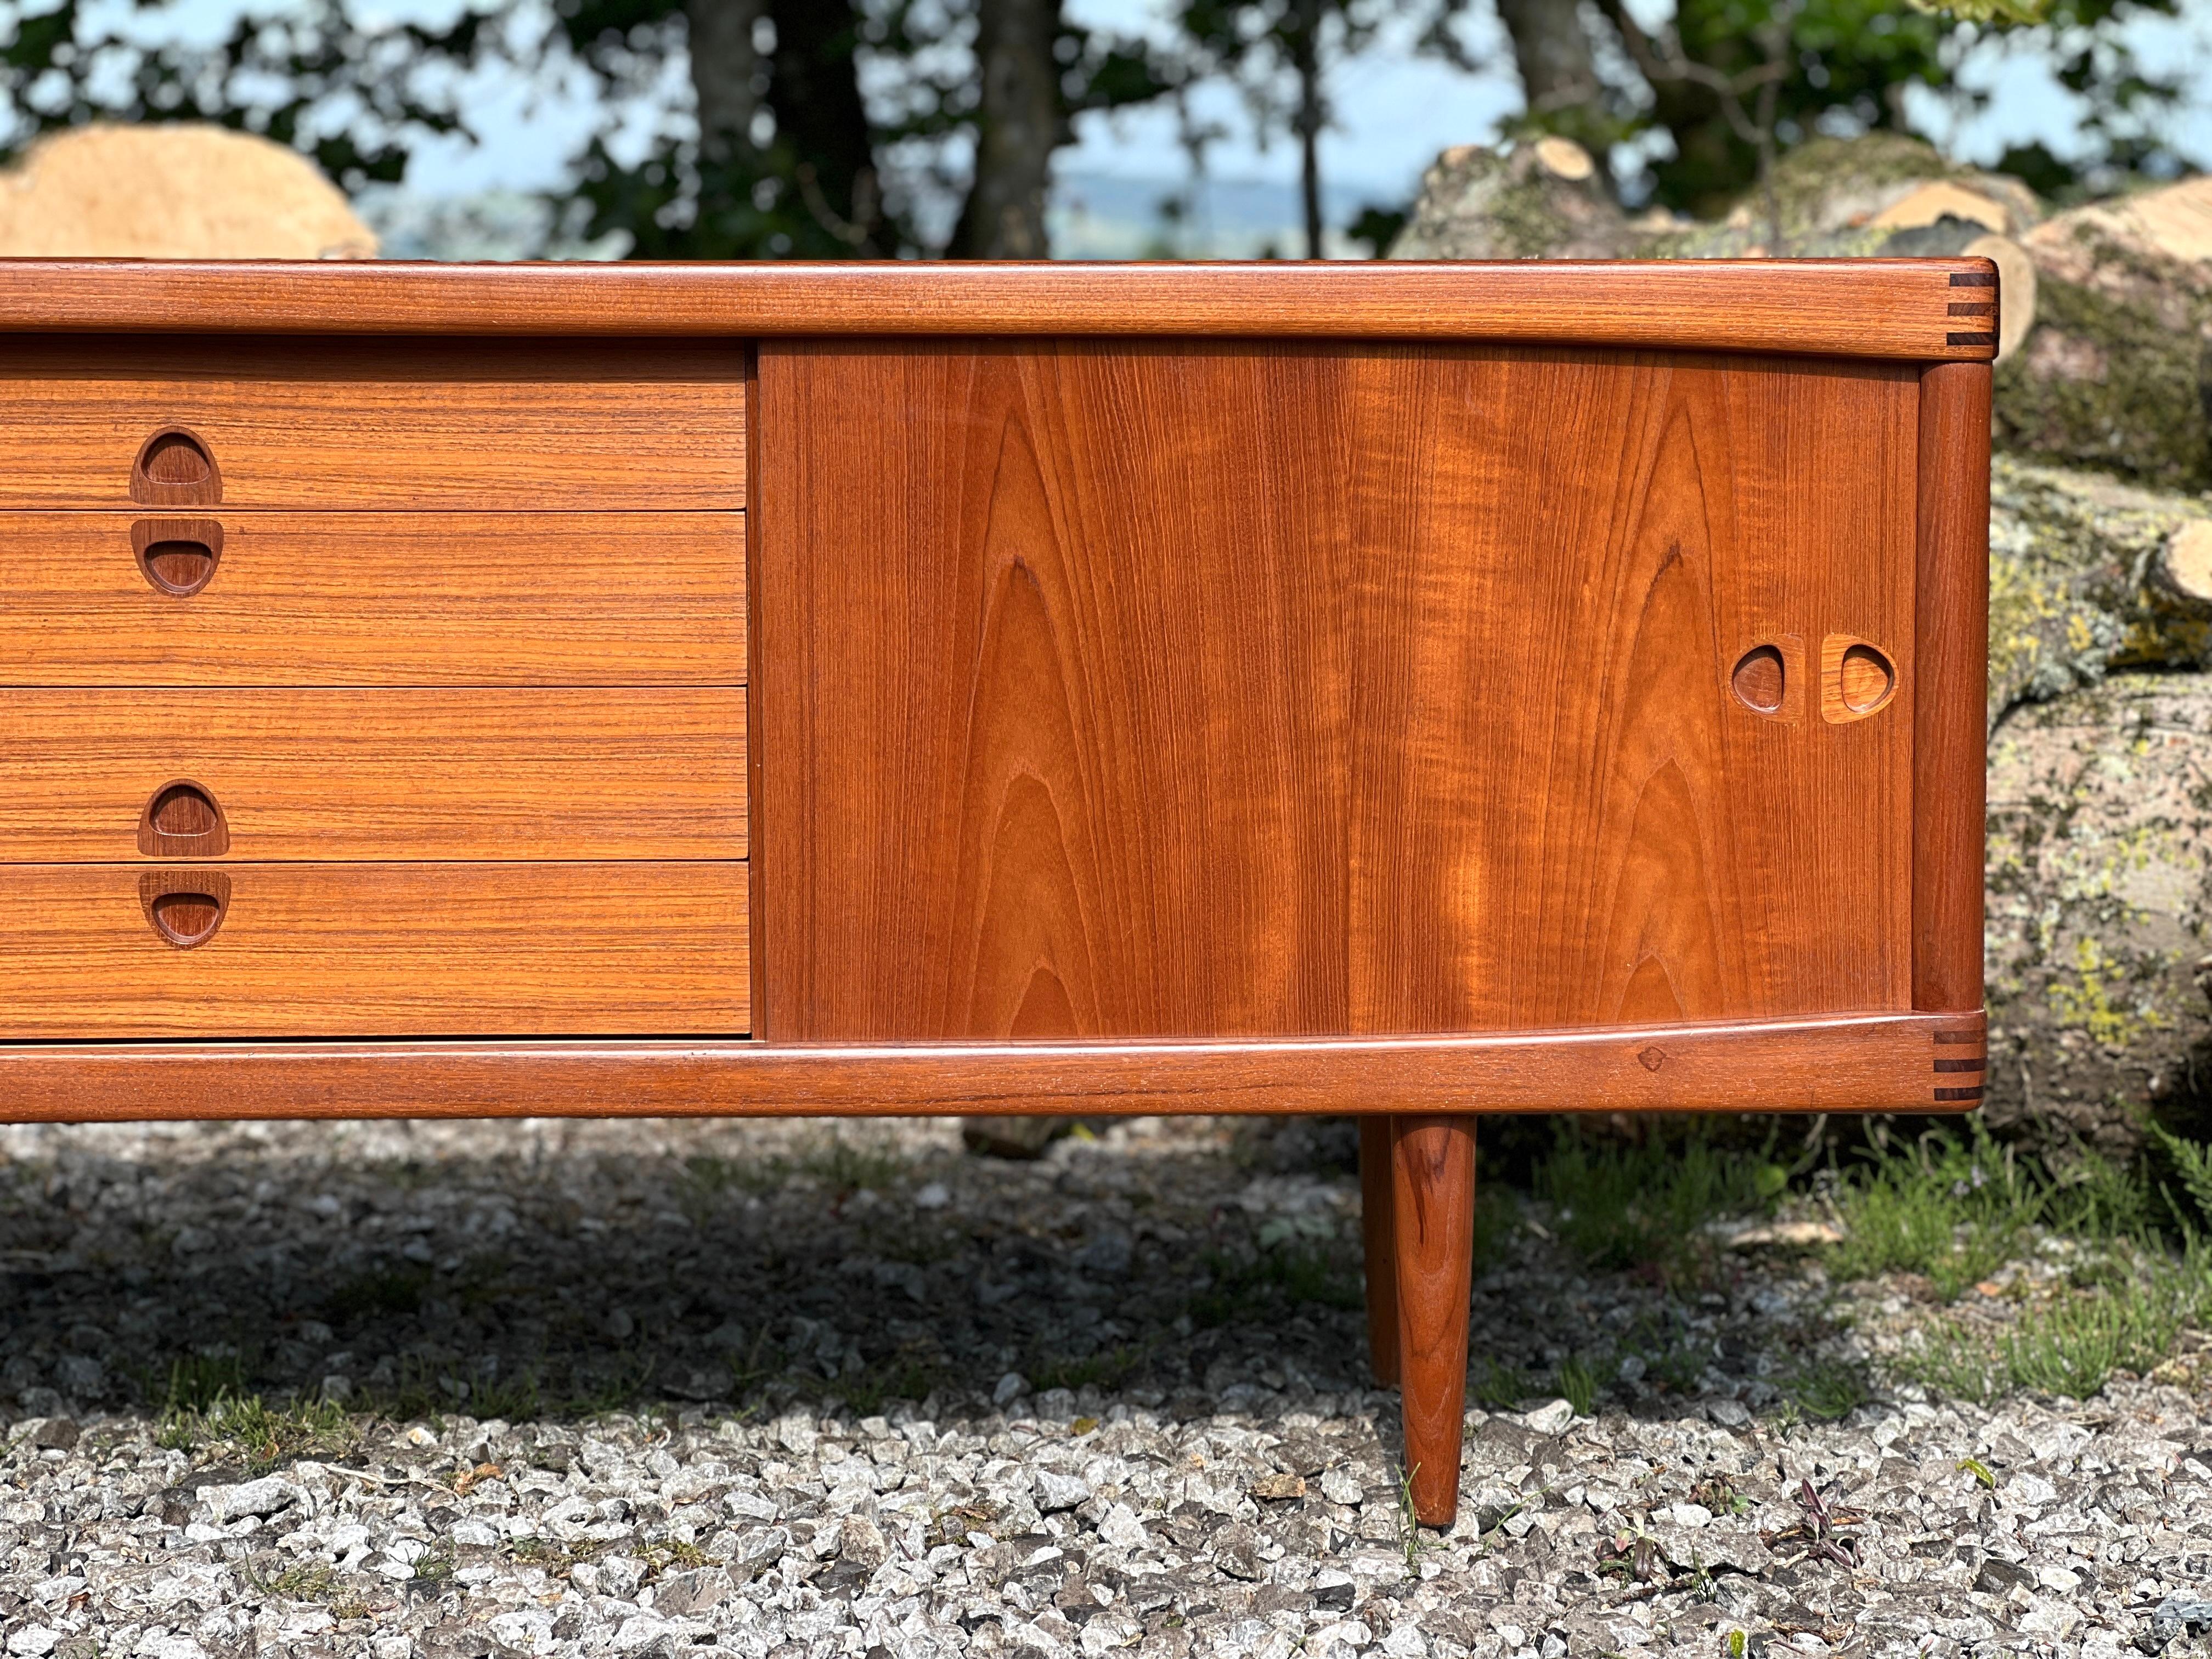 Henry Walter Klein designed this beautiful piece in the ’60s in Denmark for the well-known high-quality cabinet maker Bramin.

The sideboard has a balance designed with a bank of drawers in the middle and two sliding doors enclosing shelves. The top